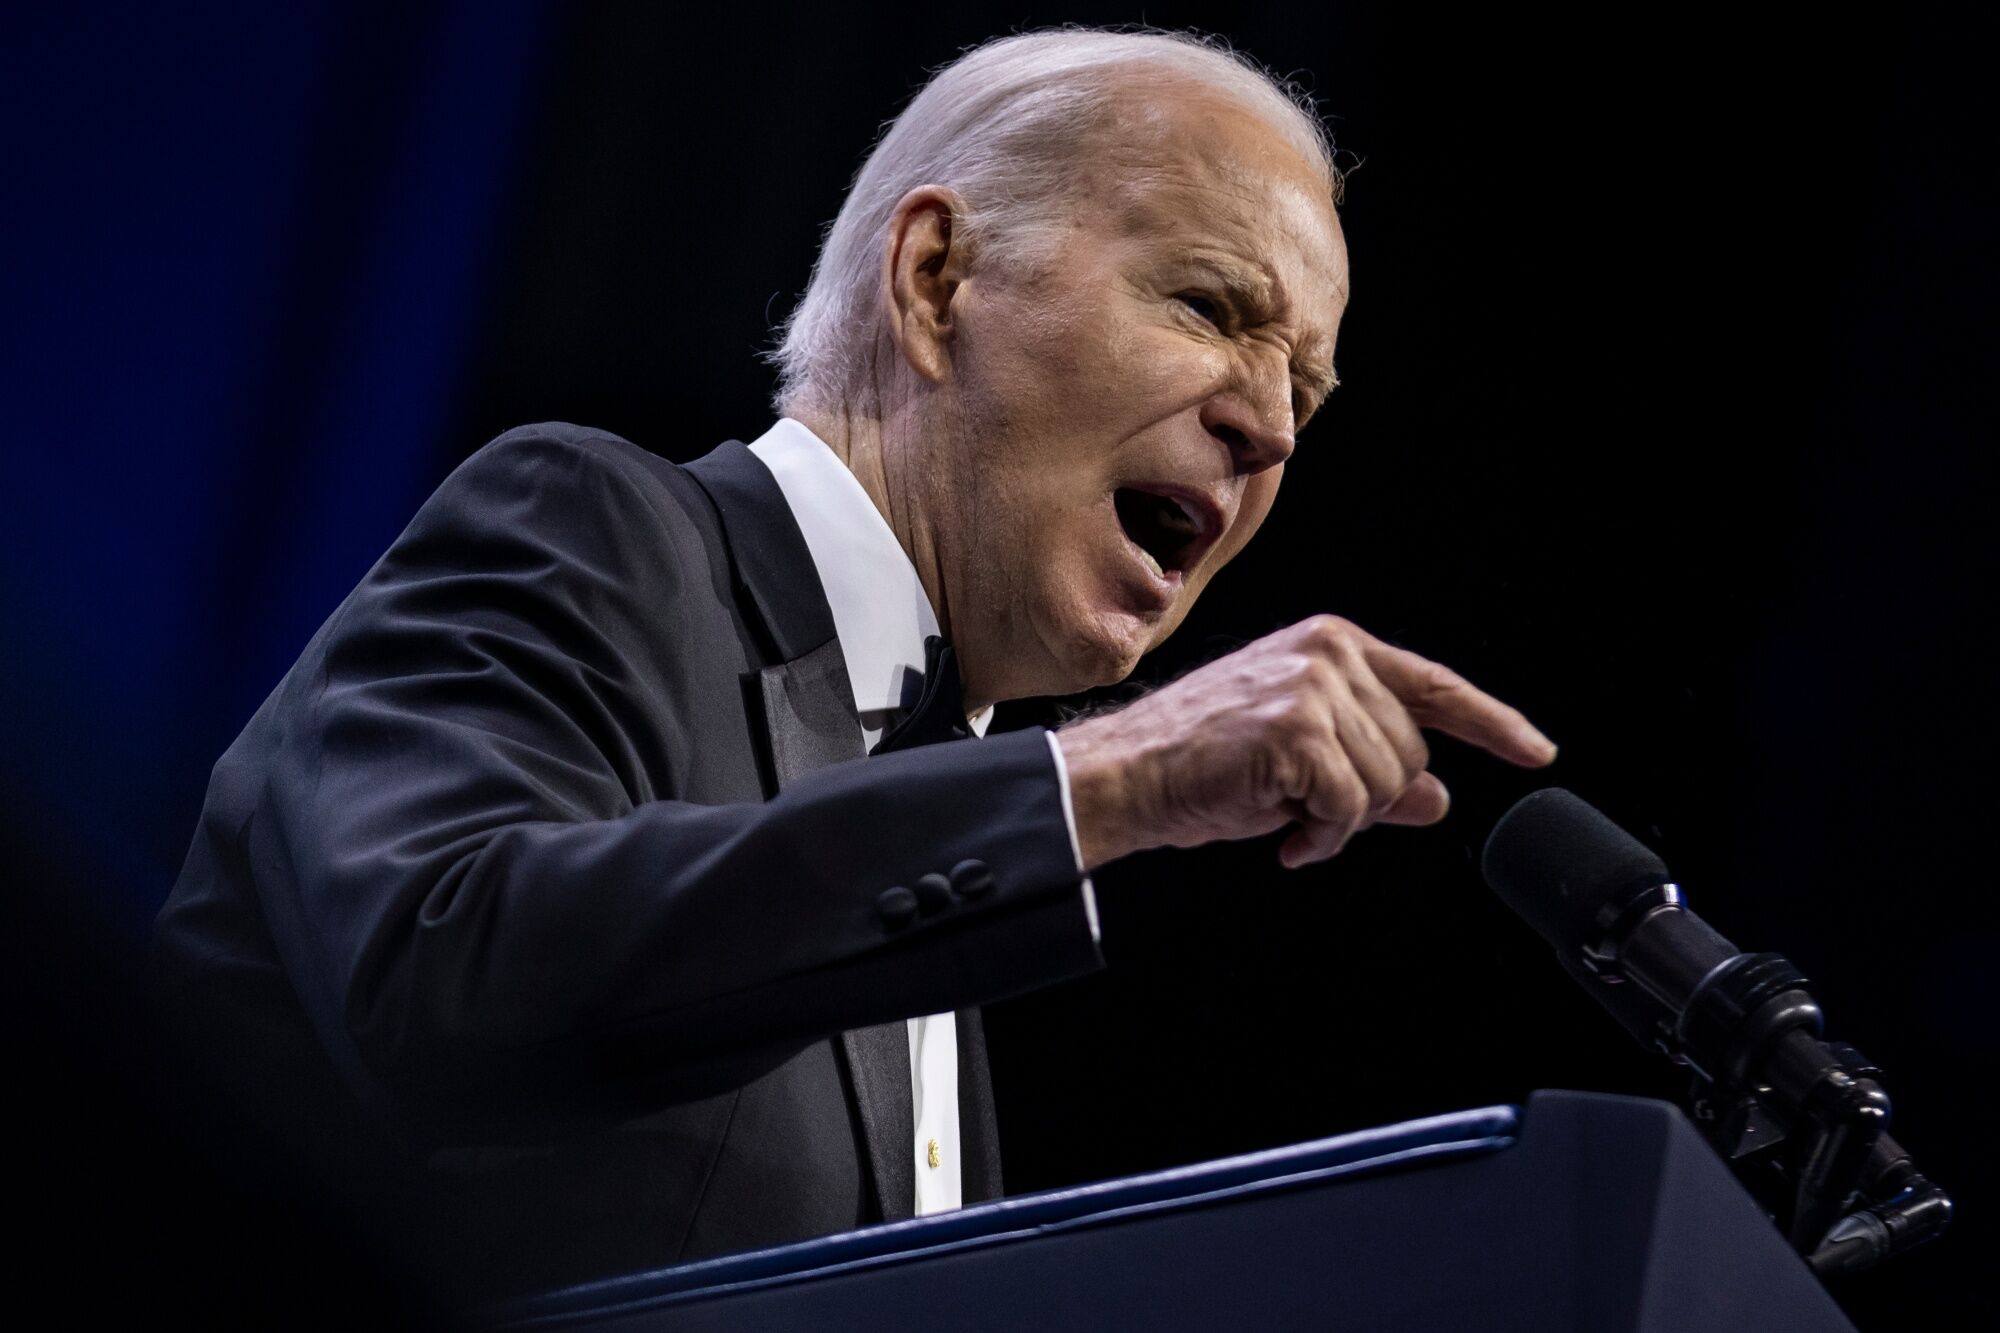 US President Joe Biden speaks during the Asian Pacific American Institute for Congressional Studies gala in Washington on May 14. US tariffs on Chinese goods, pursued under both Republican and Democratic administrations, will do little to curb the US federal deficit if government spending remains unchecked. Photo: Bloomberg